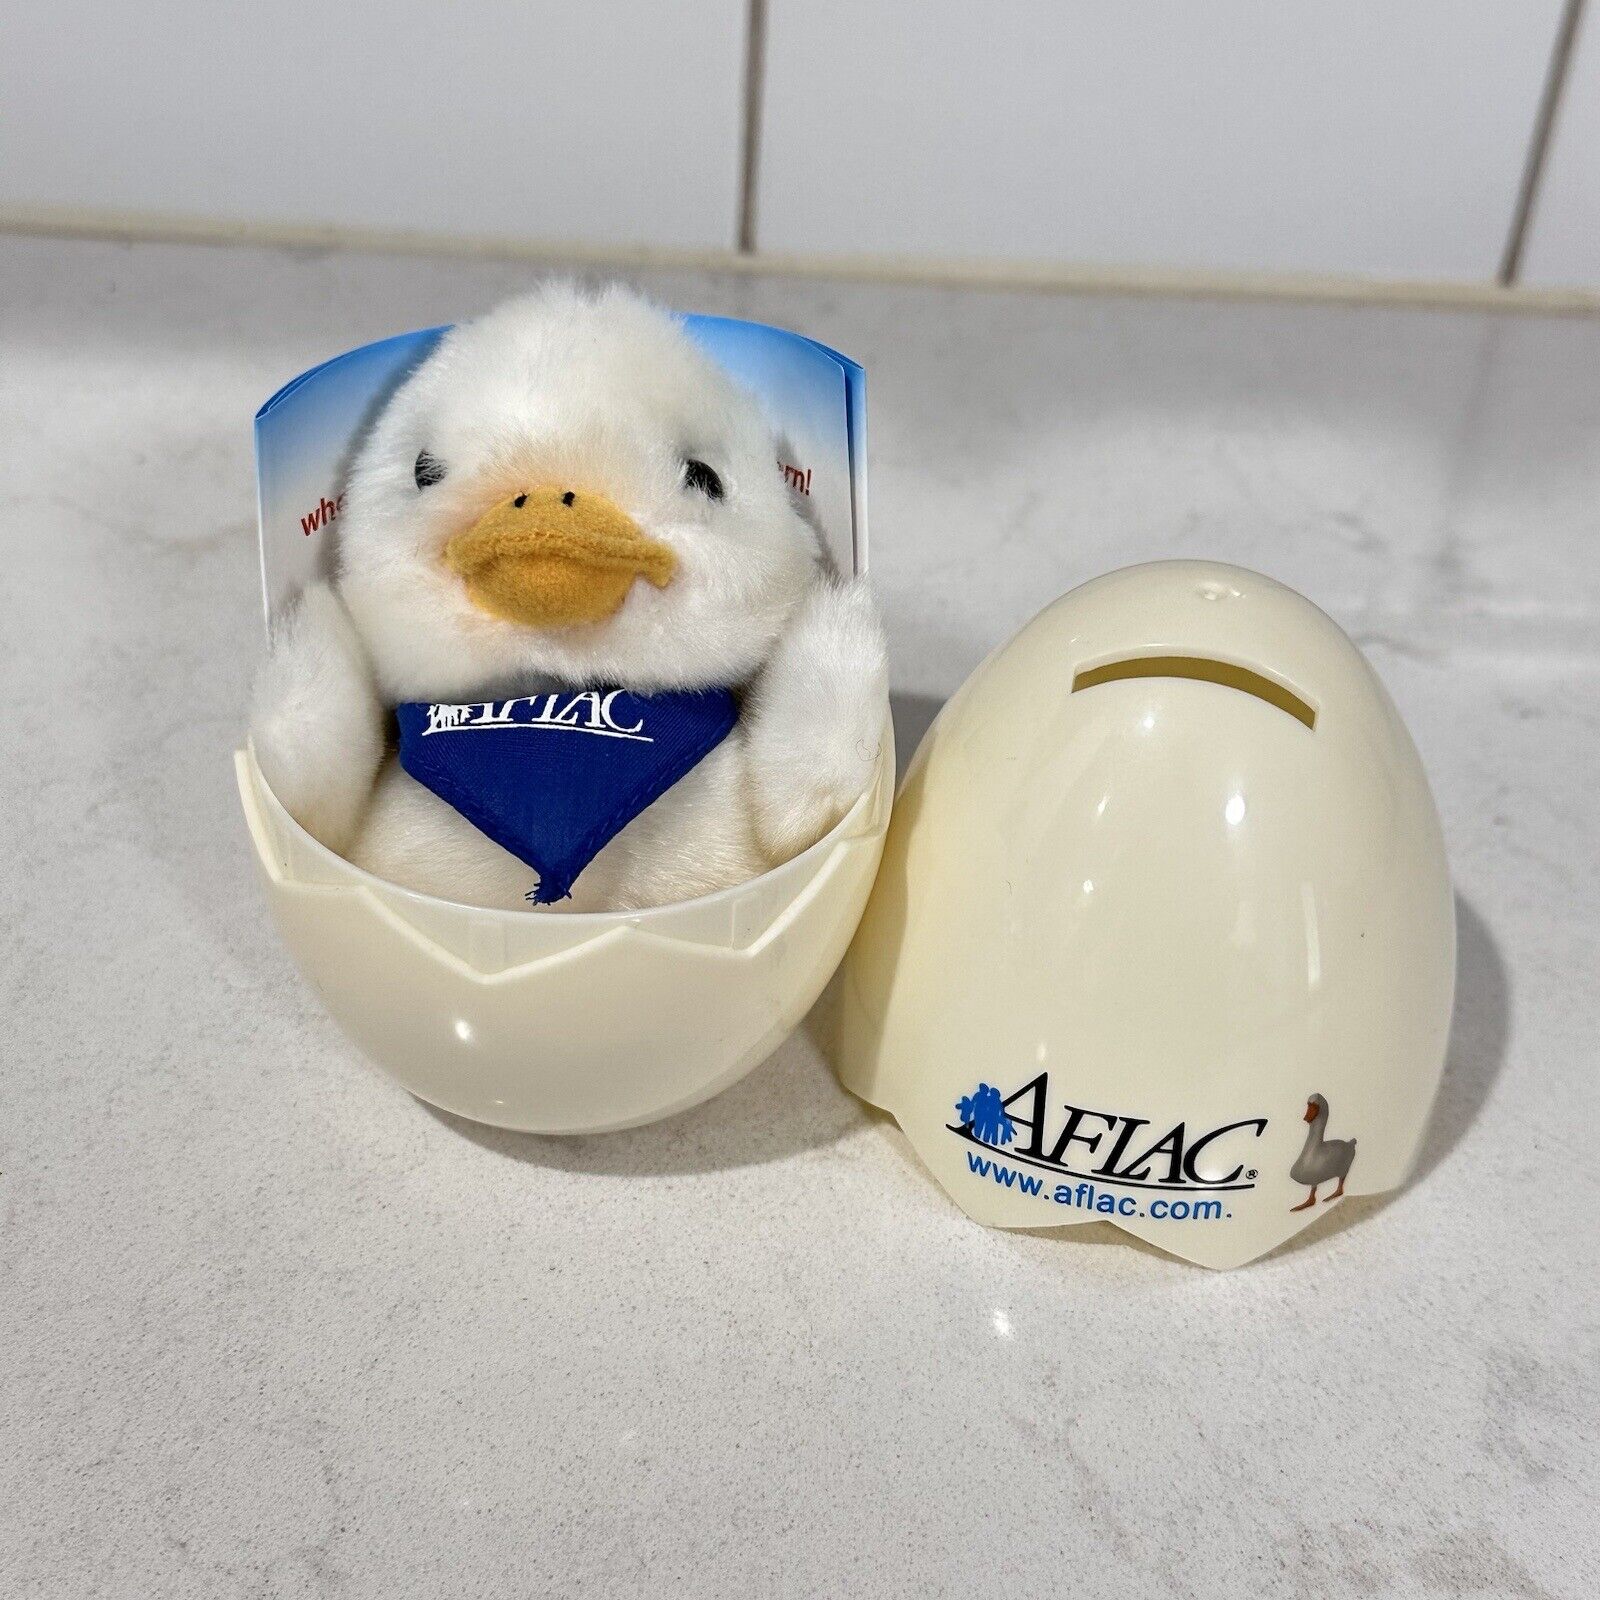 Aflac plastic Egg Bank With 4\